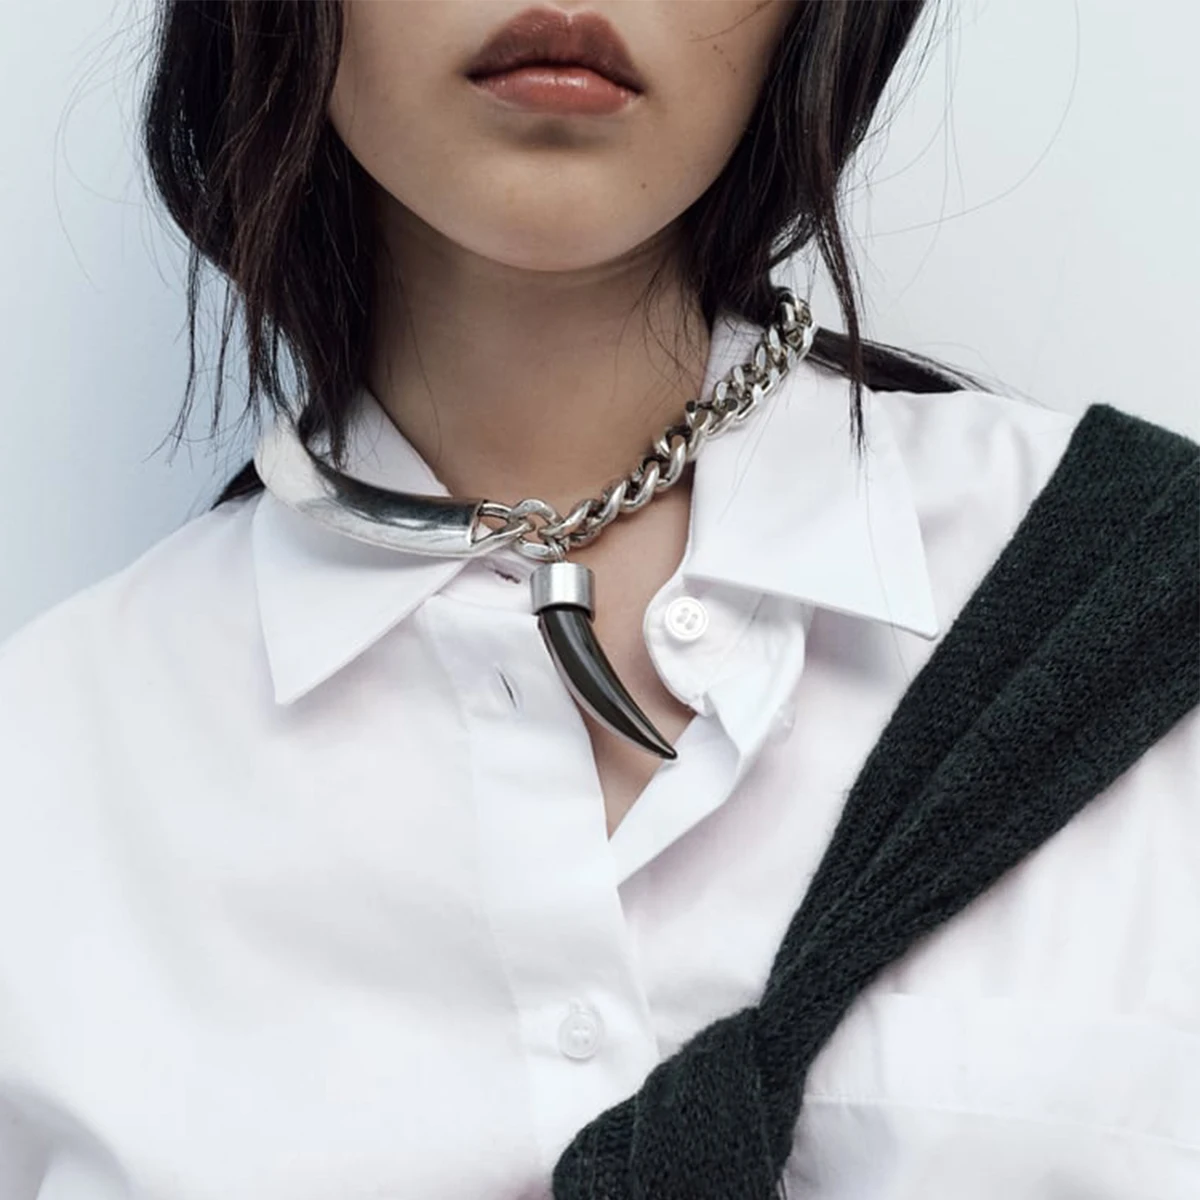 

ZAA Necklace Vintage Silver Color Asymmetric Metal Choker Necklace for Women Statement Cow Horn Pendant Necklace Jewelry on Neck